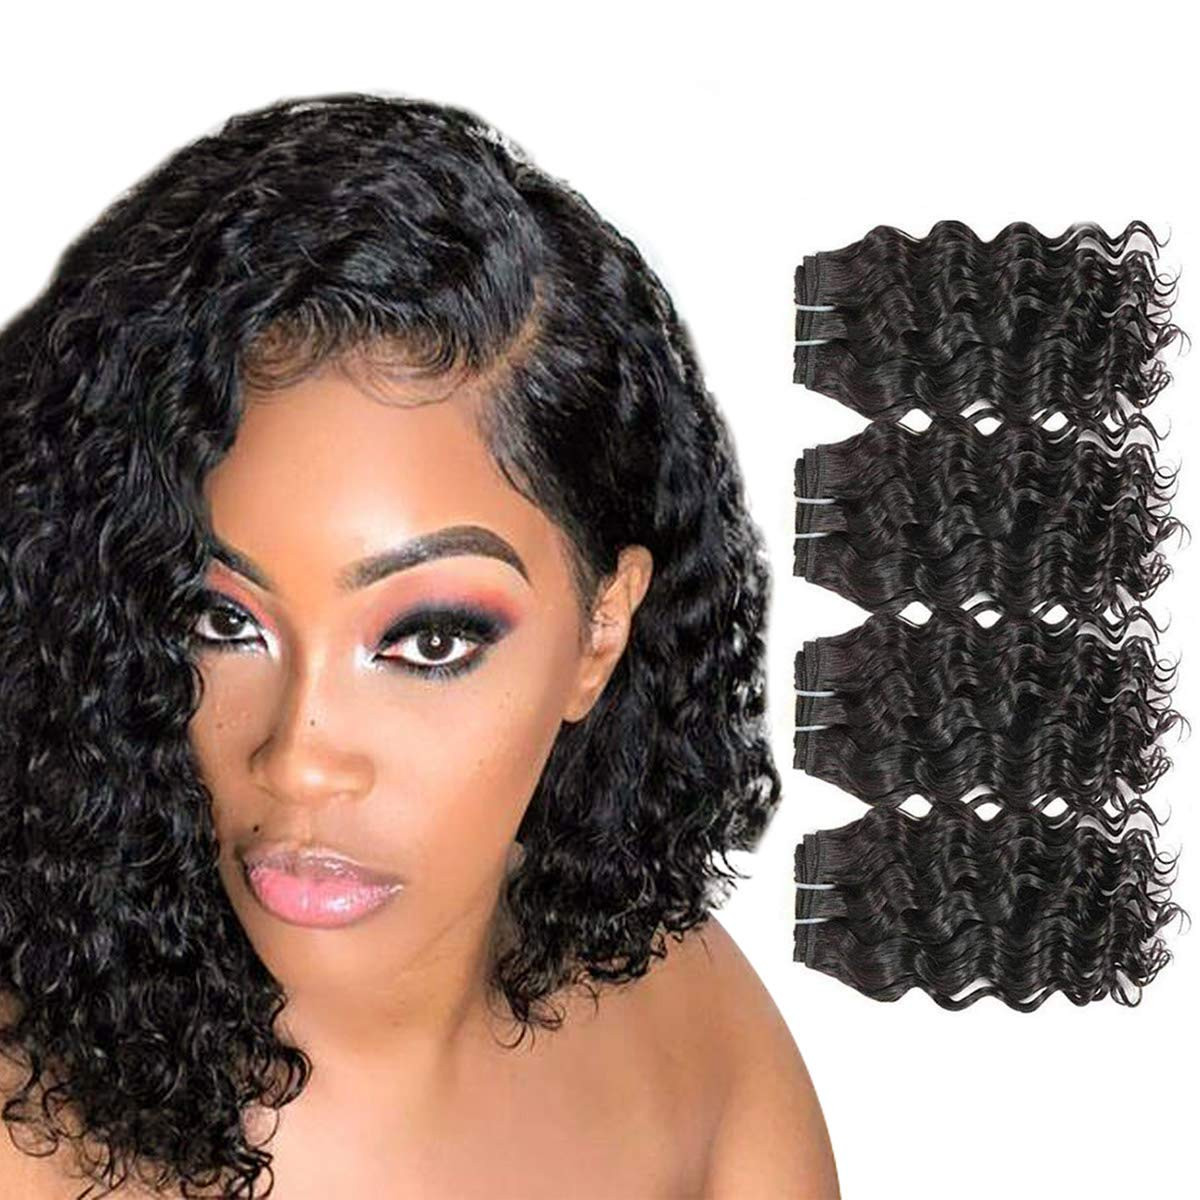 Deep Wave Weave Short Hairstyles Awesome Amazon Fashion Line Brazilian Body Wave Water Wave Of Deep Wave Weave Short Hairstyles 